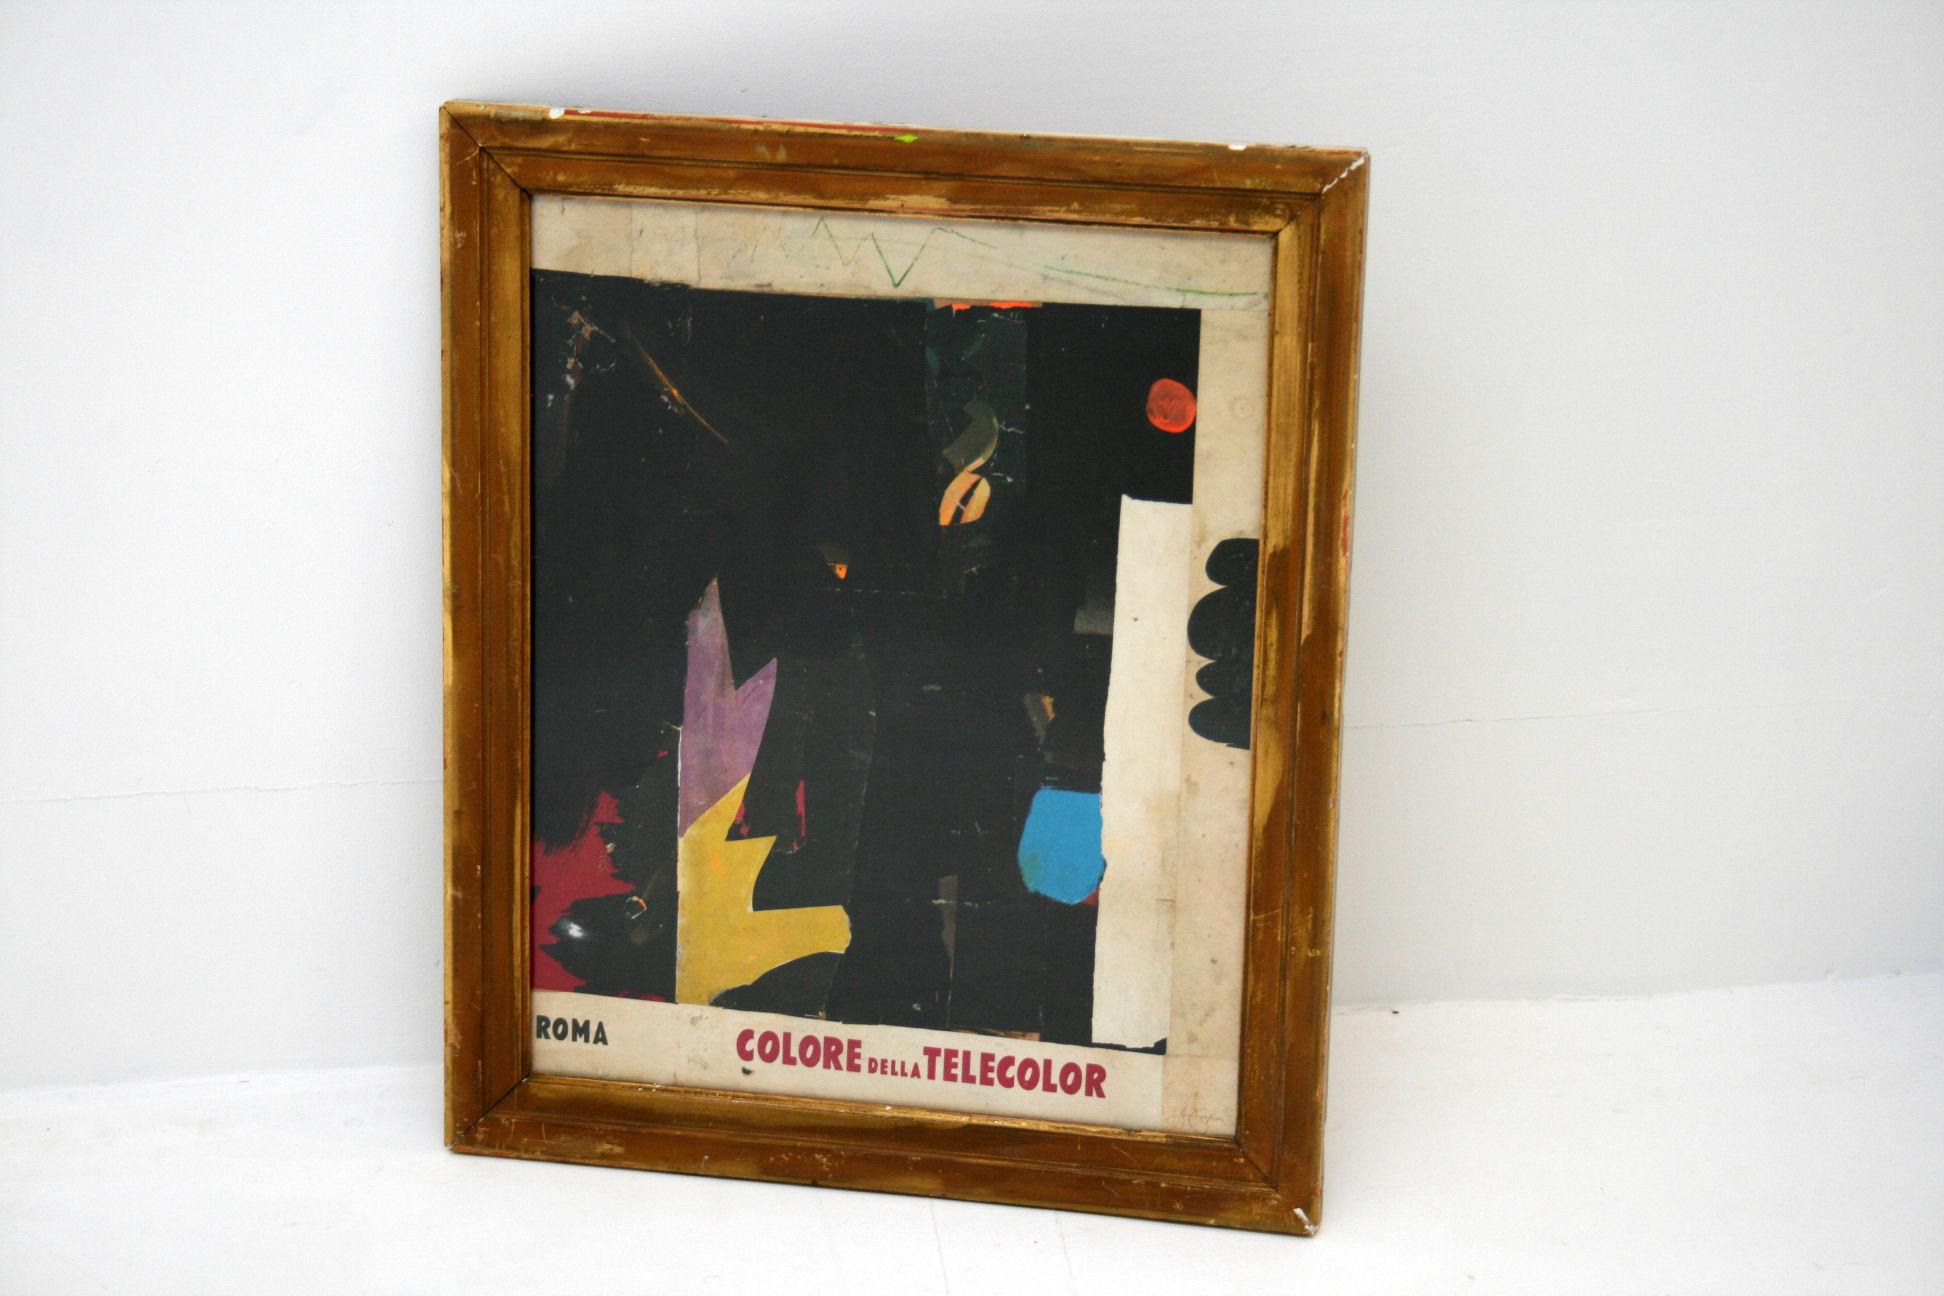 Colore Della telecore
By Huw Griffith
Collage: 19th century French ephemera, film posters
from ‘30s, ‘40s & ‘50s, graphite crayons and
household paint
The collage has been placed into an antique frame which has been reworked by Huw and is part